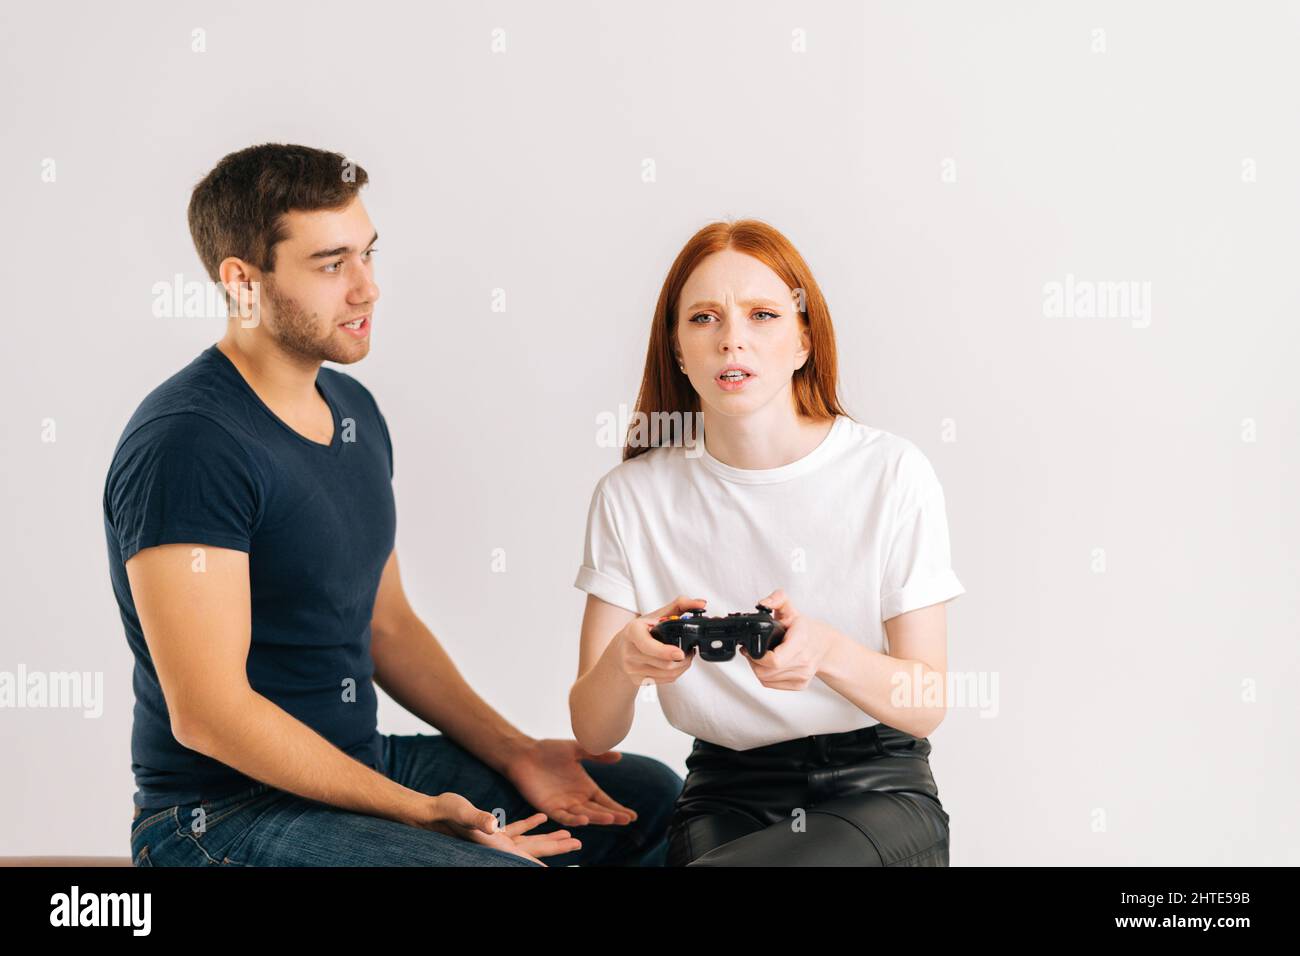 Premium Photo  Boyfriend sits engrossed in playing online games on his  smartphone, ignoring his girlfriend waiting.